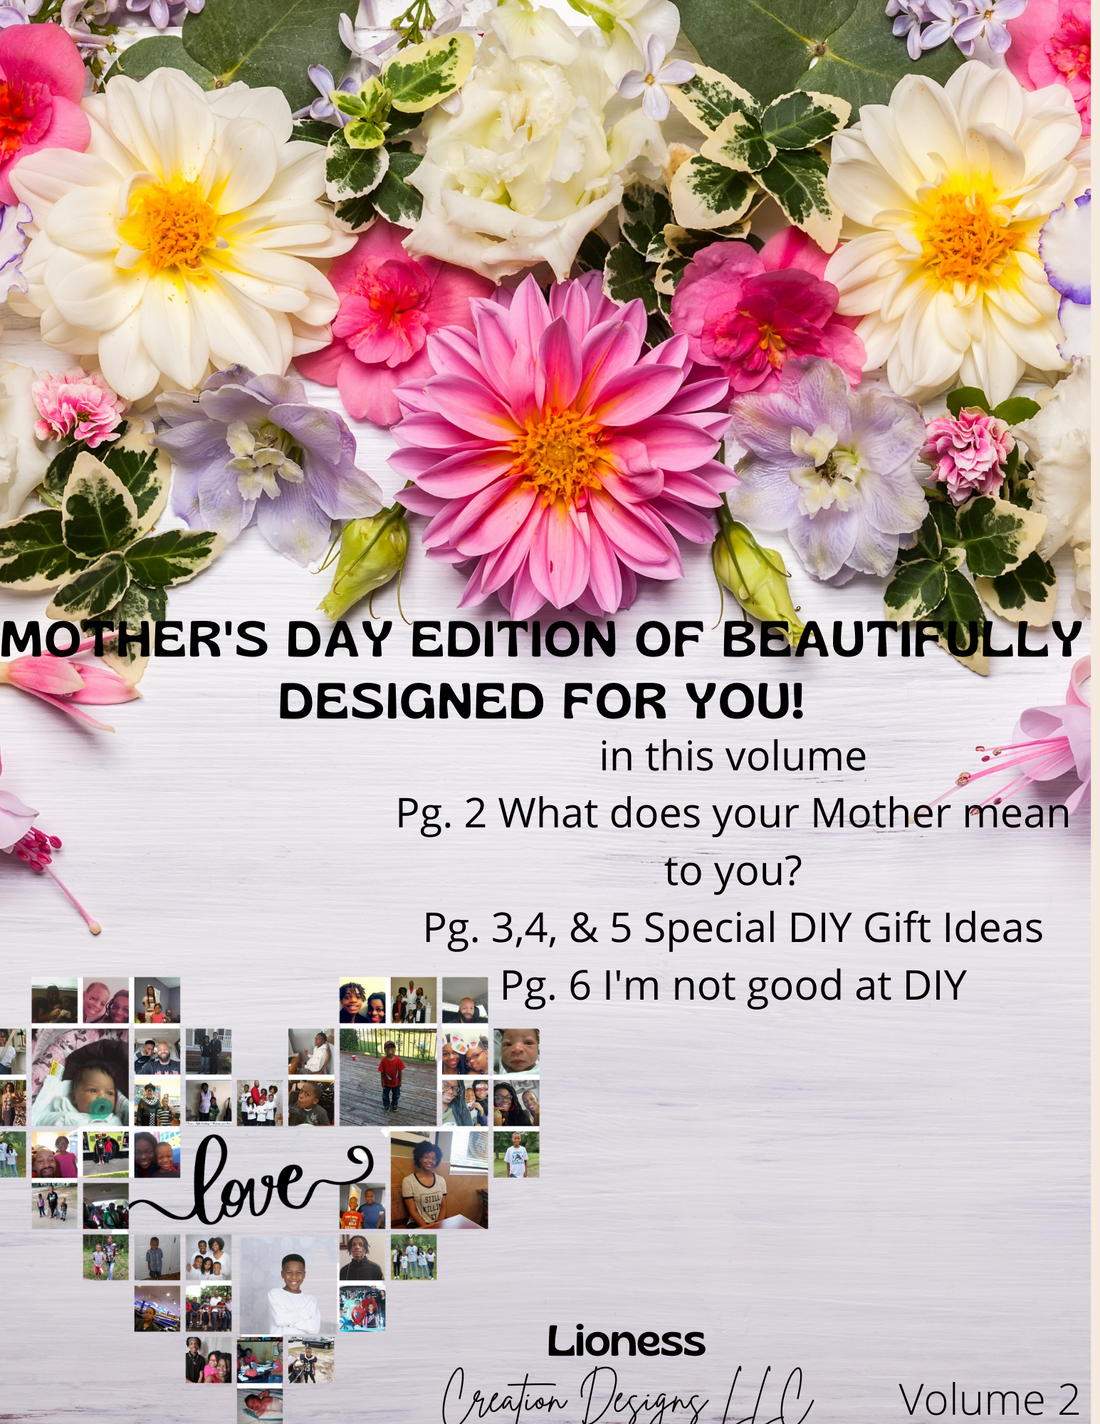 Mother's Day Edition of Beautifully Designed for You!